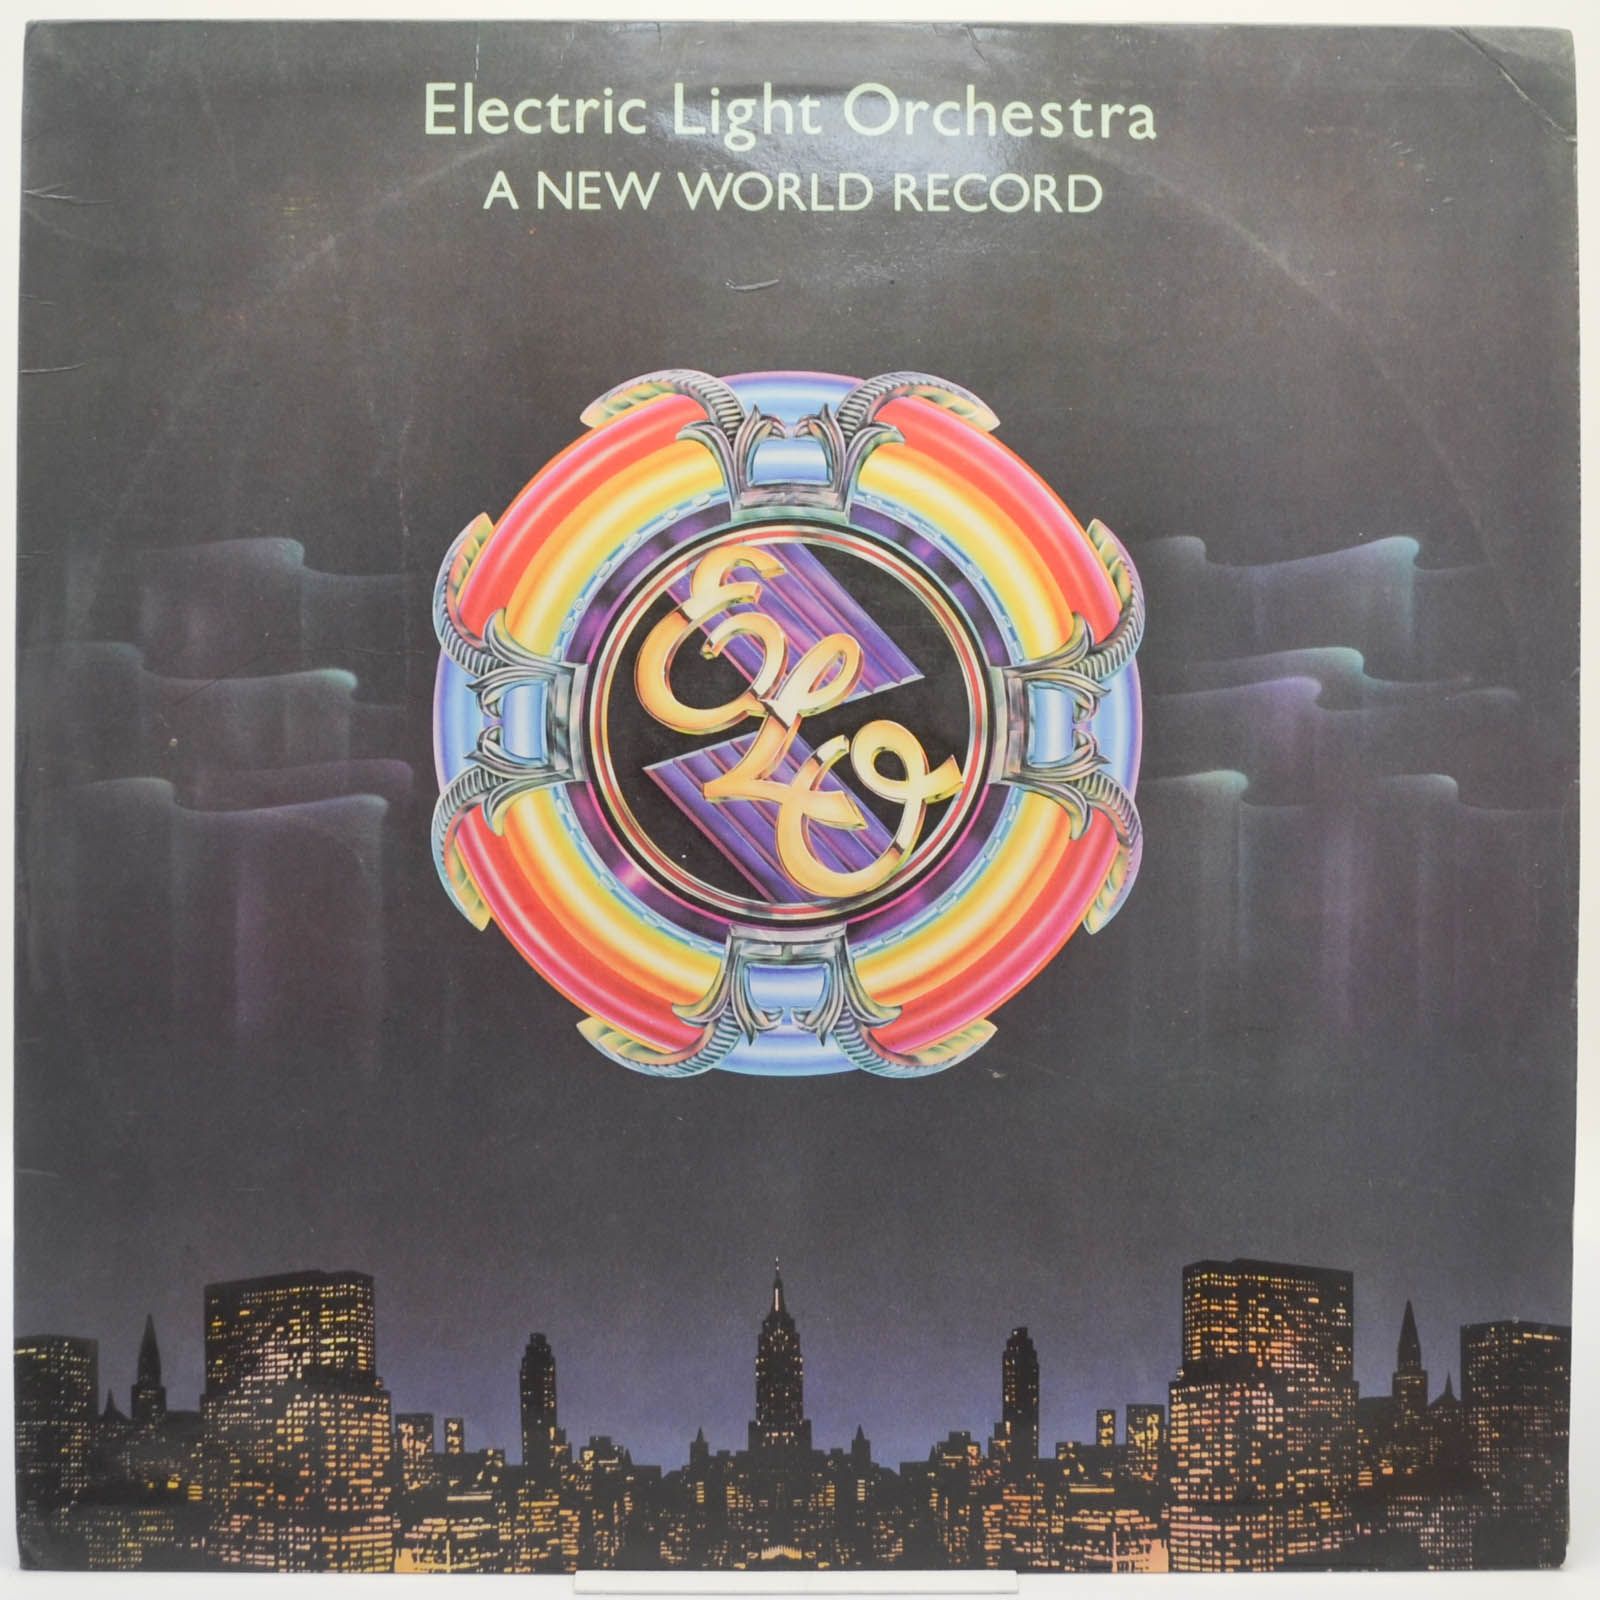 Electric Light Orchestra — A New World Record, 1976